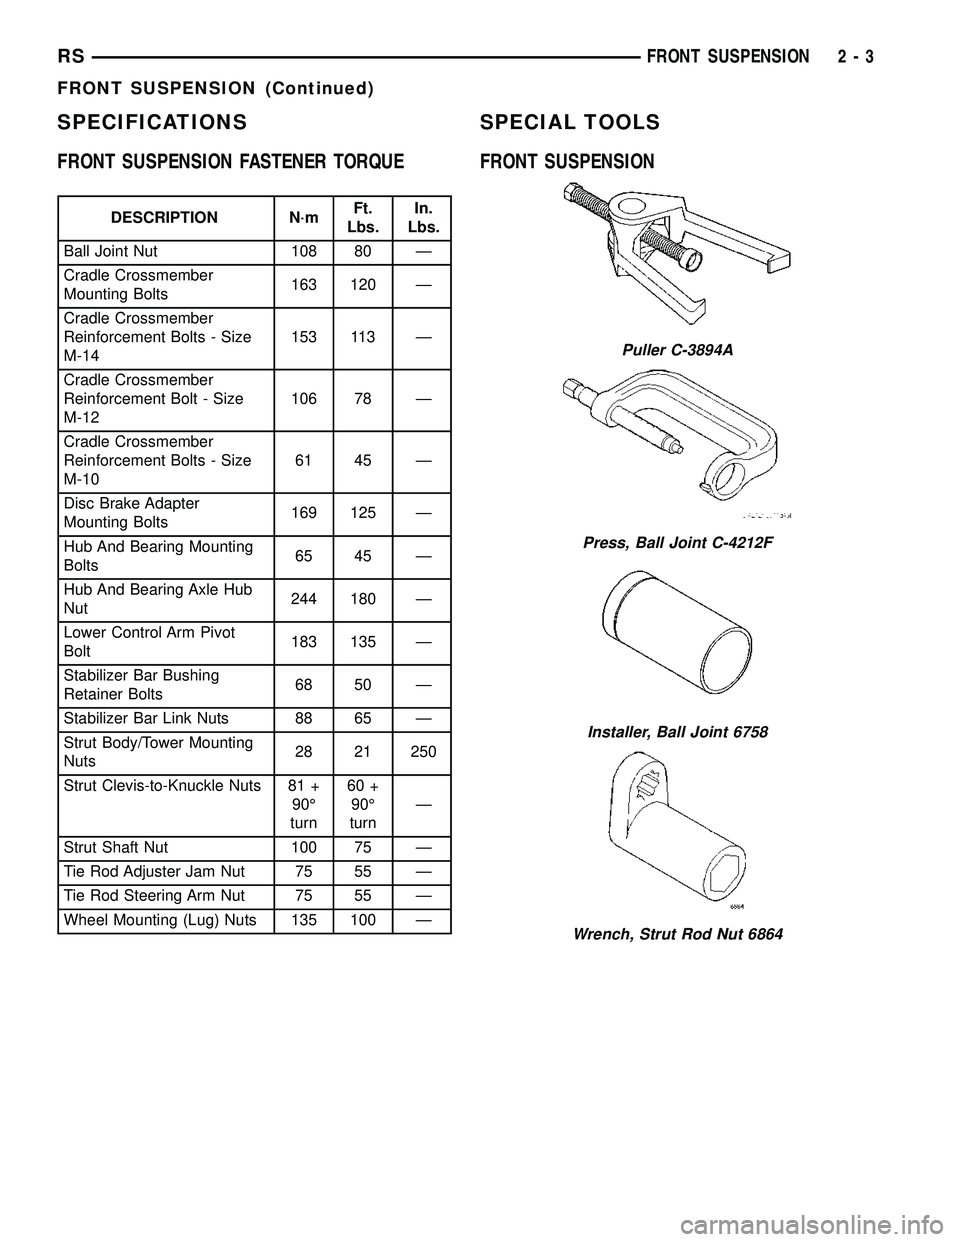 CHRYSLER VOYAGER 2005  Service Manual SPECIFICATIONS
FRONT SUSPENSION FASTENER TORQUE
DESCRIPTION N´mFt.
Lbs.In.
Lbs.
Ball Joint Nut 108 80 Ð
Cradle Crossmember
Mounting Bolts163 120 Ð
Cradle Crossmember
Reinforcement Bolts - Size
M-14